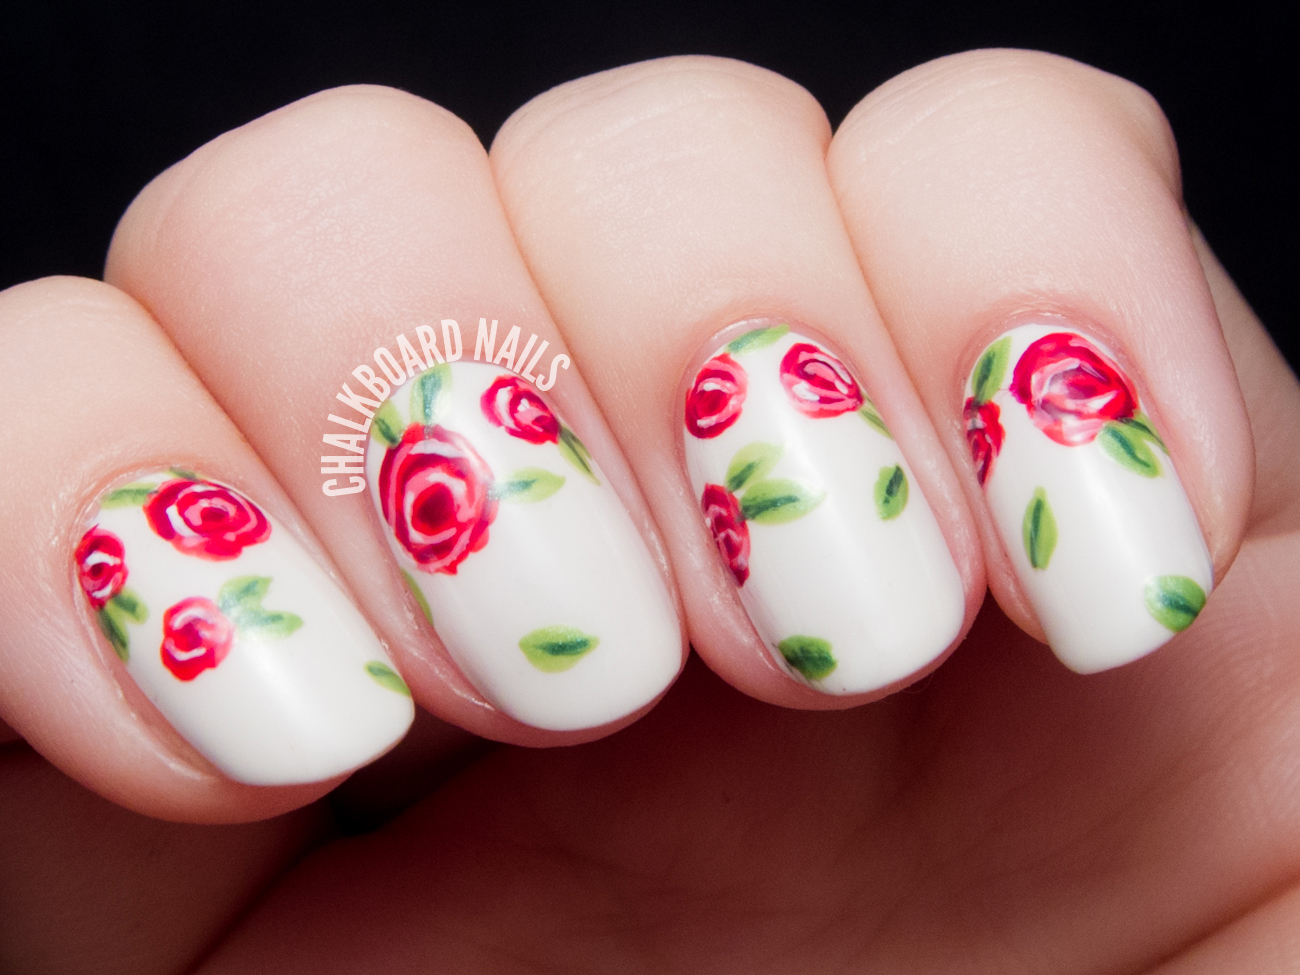 Sweet red rose floral by @chalkboardnails